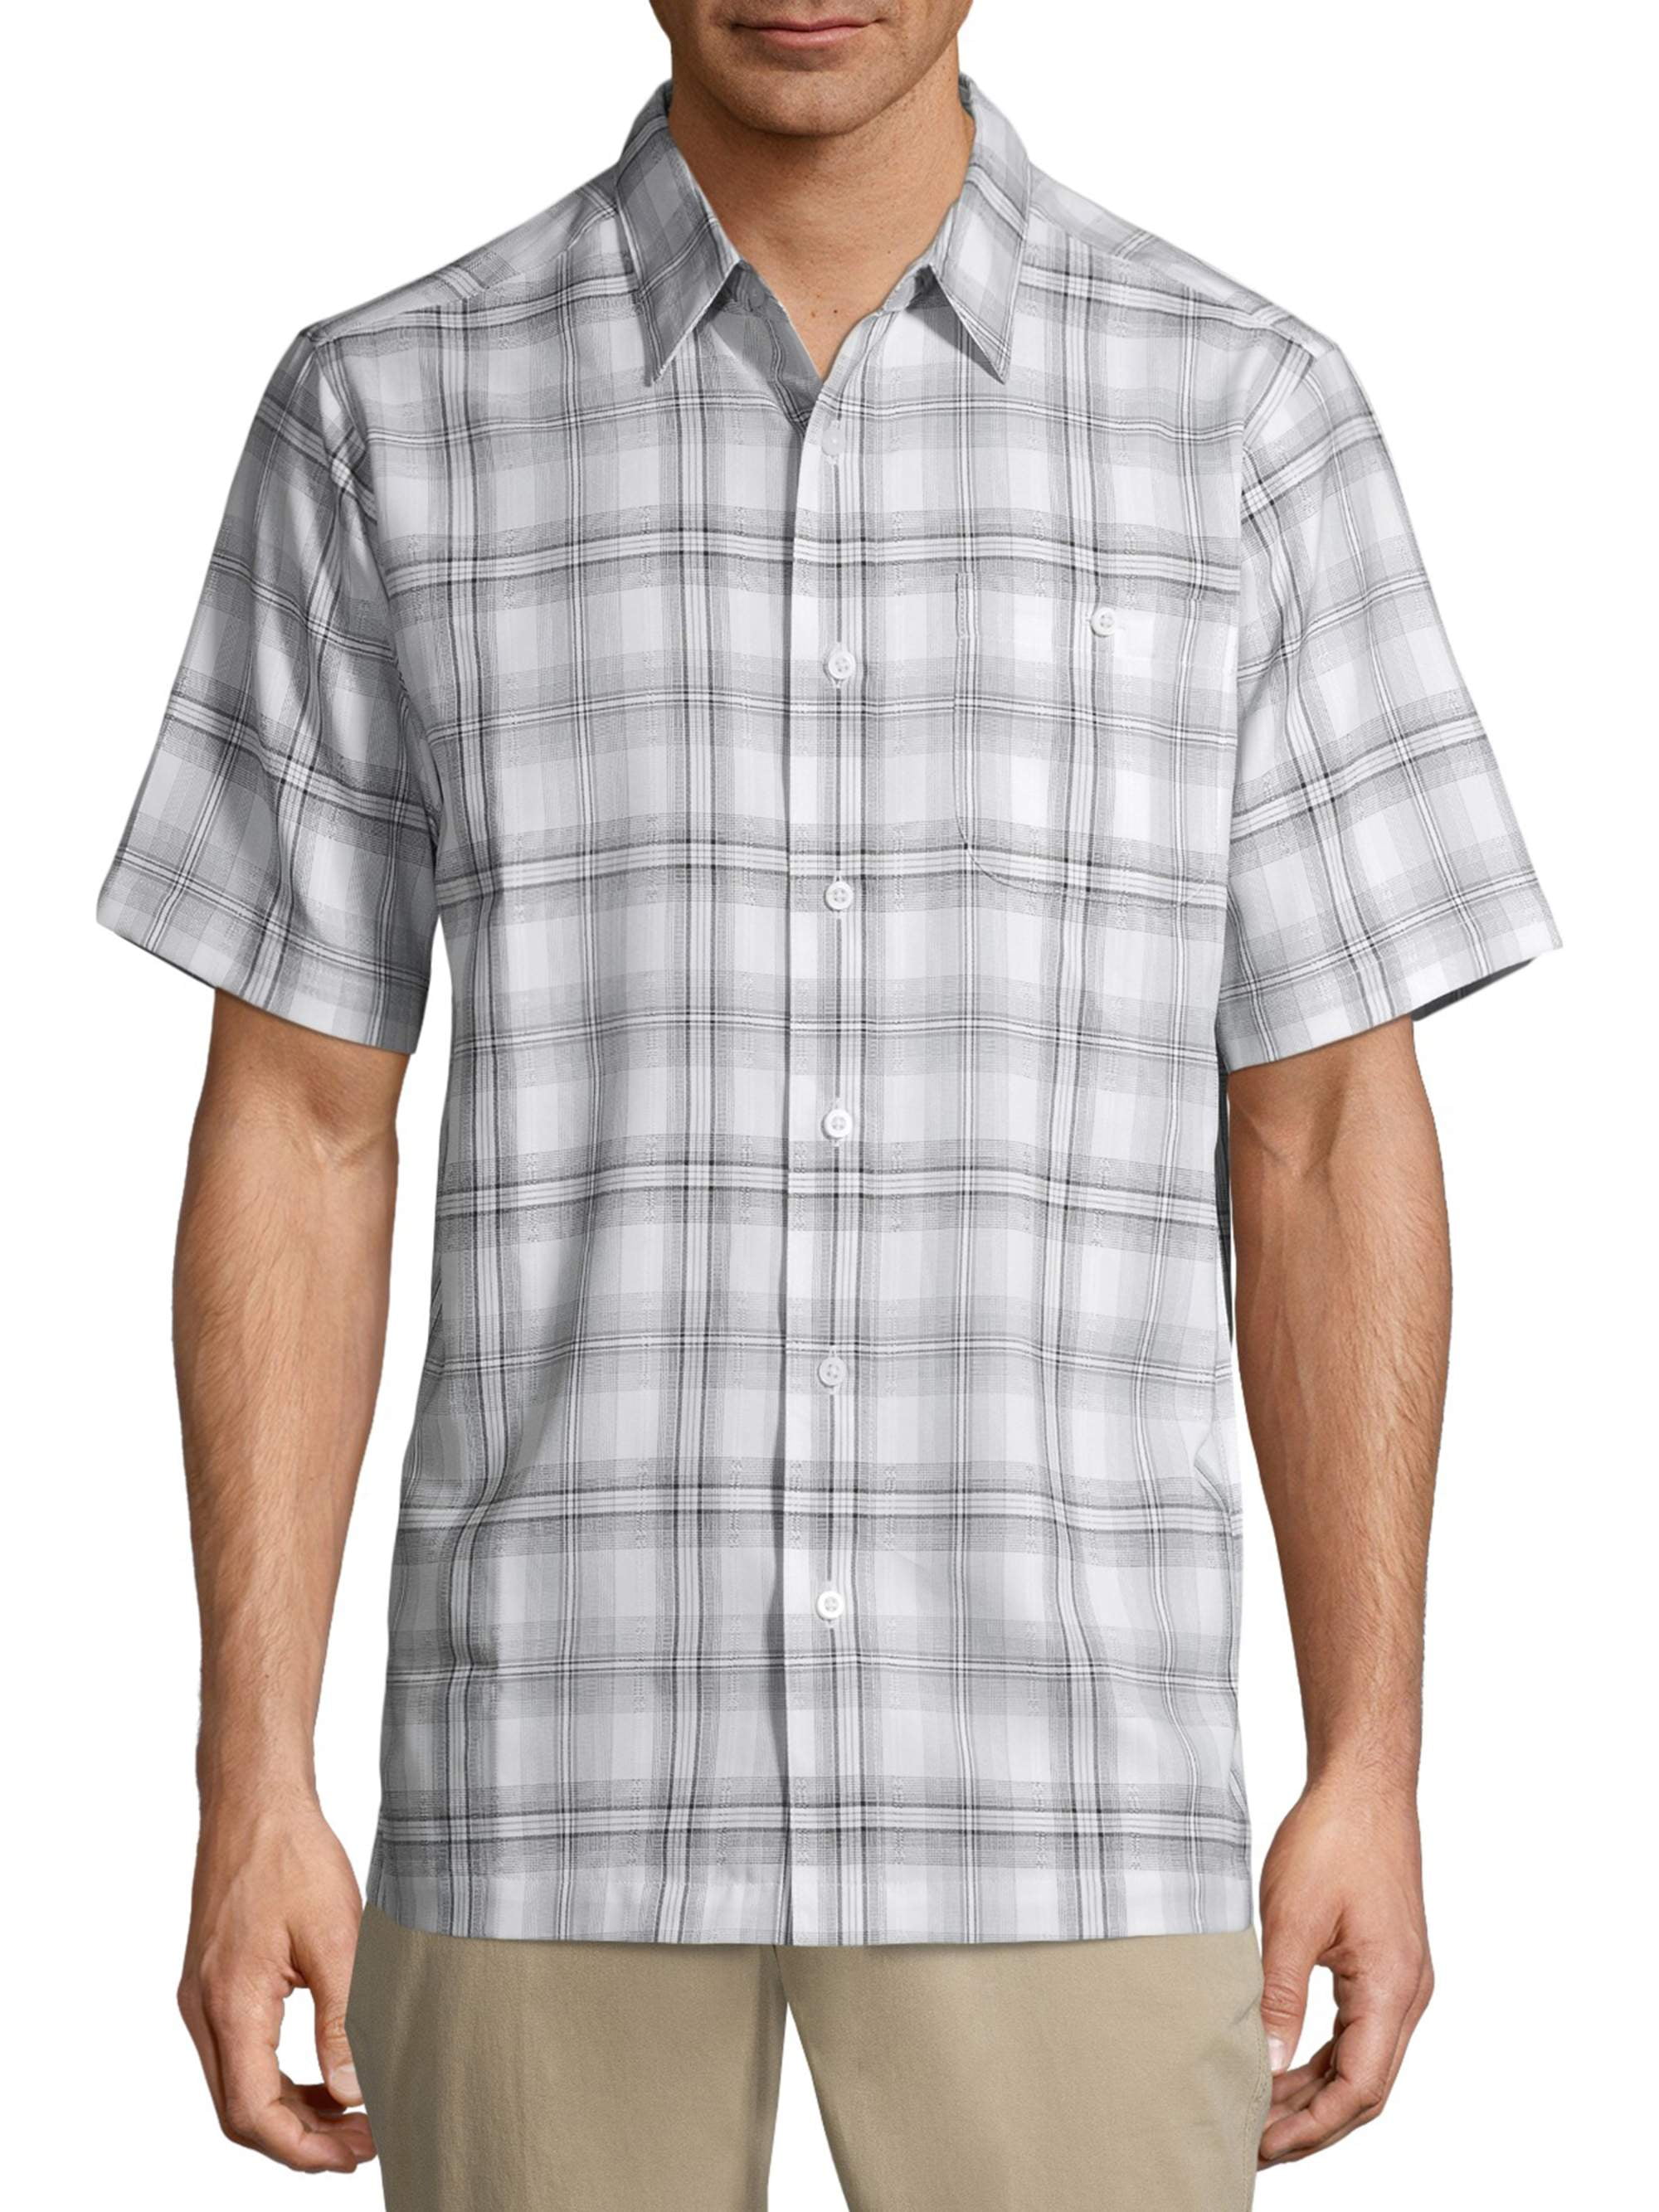 GEORGE Short Sleeve Button Down Classic Fit Button-Up Shirt (Men's or ...